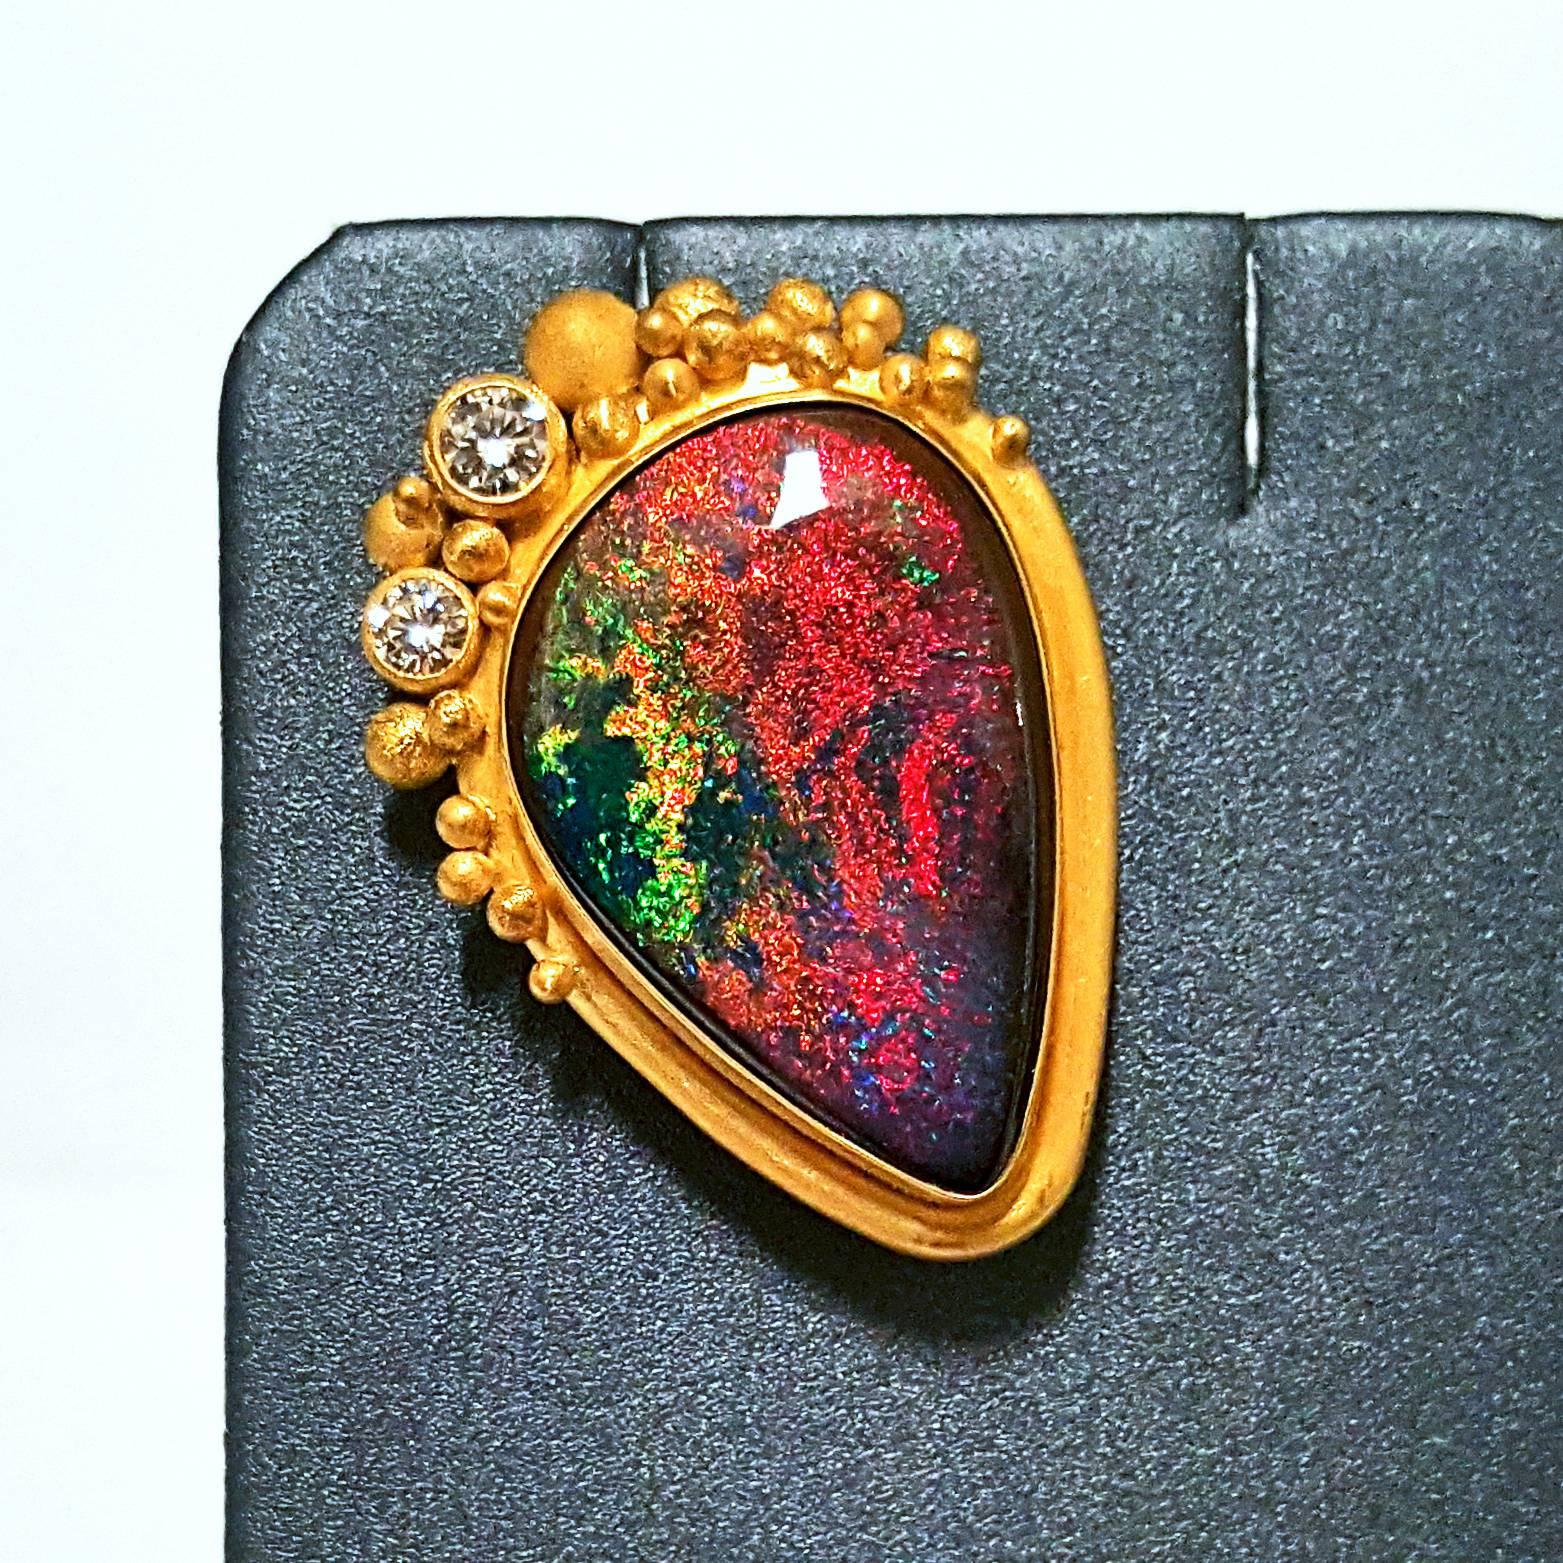 One of a Kind Pin handcrafted in 22k yellow gold by renowned jewelry artist Lilly Fitzgerald. The pin showcases a phenomenal Australian boulder opal of collector's quality, displaying fine rainbow pinfire and a beautiful polish. The opal is